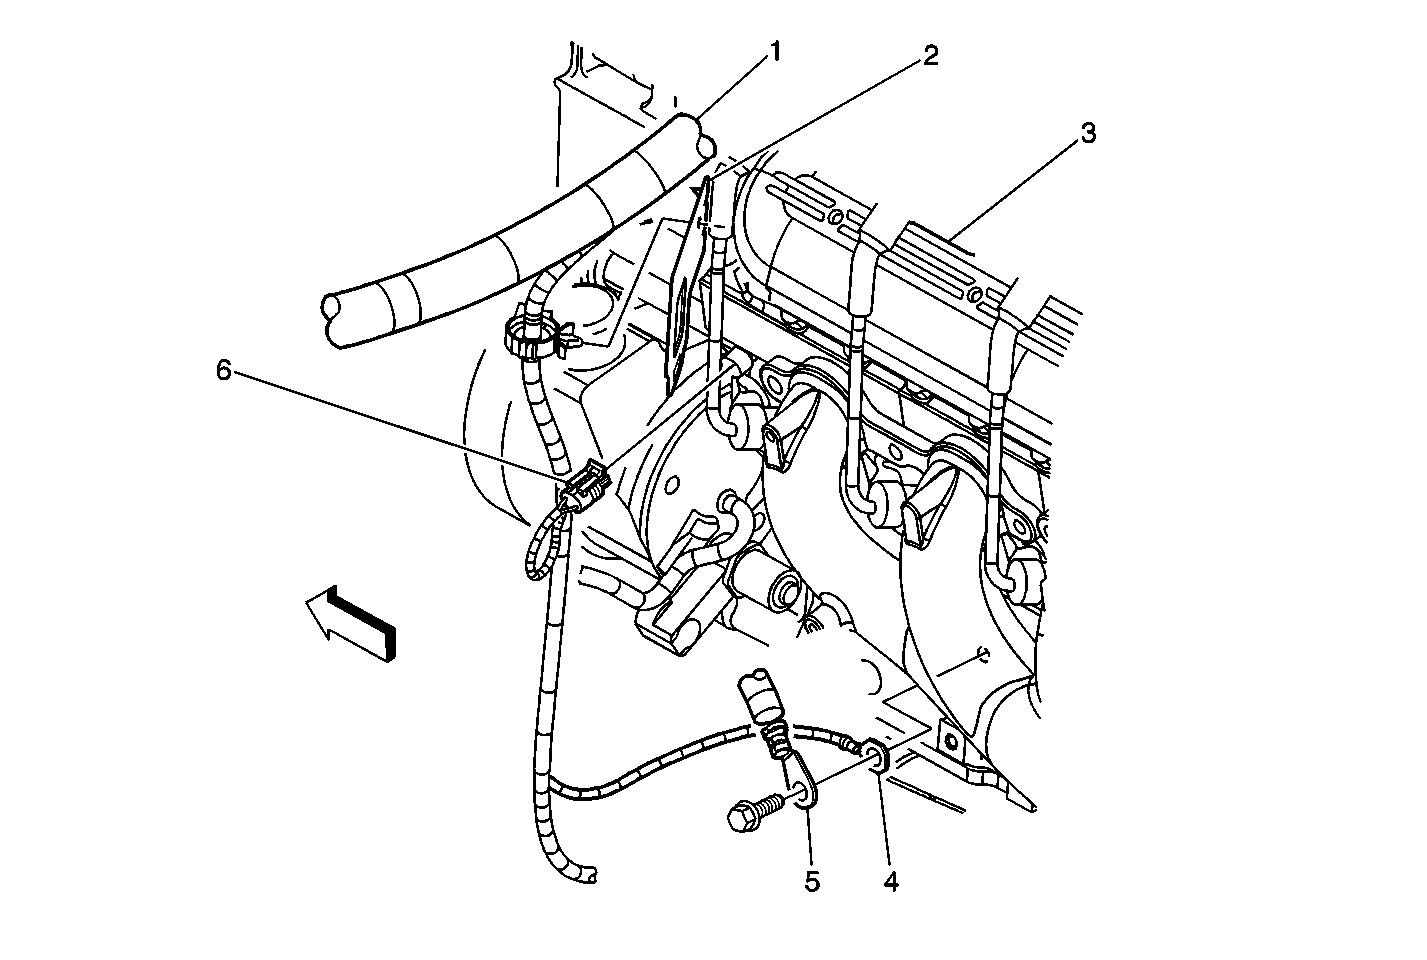 Lower_Left_Side_of_the_Engine_Components.JPG